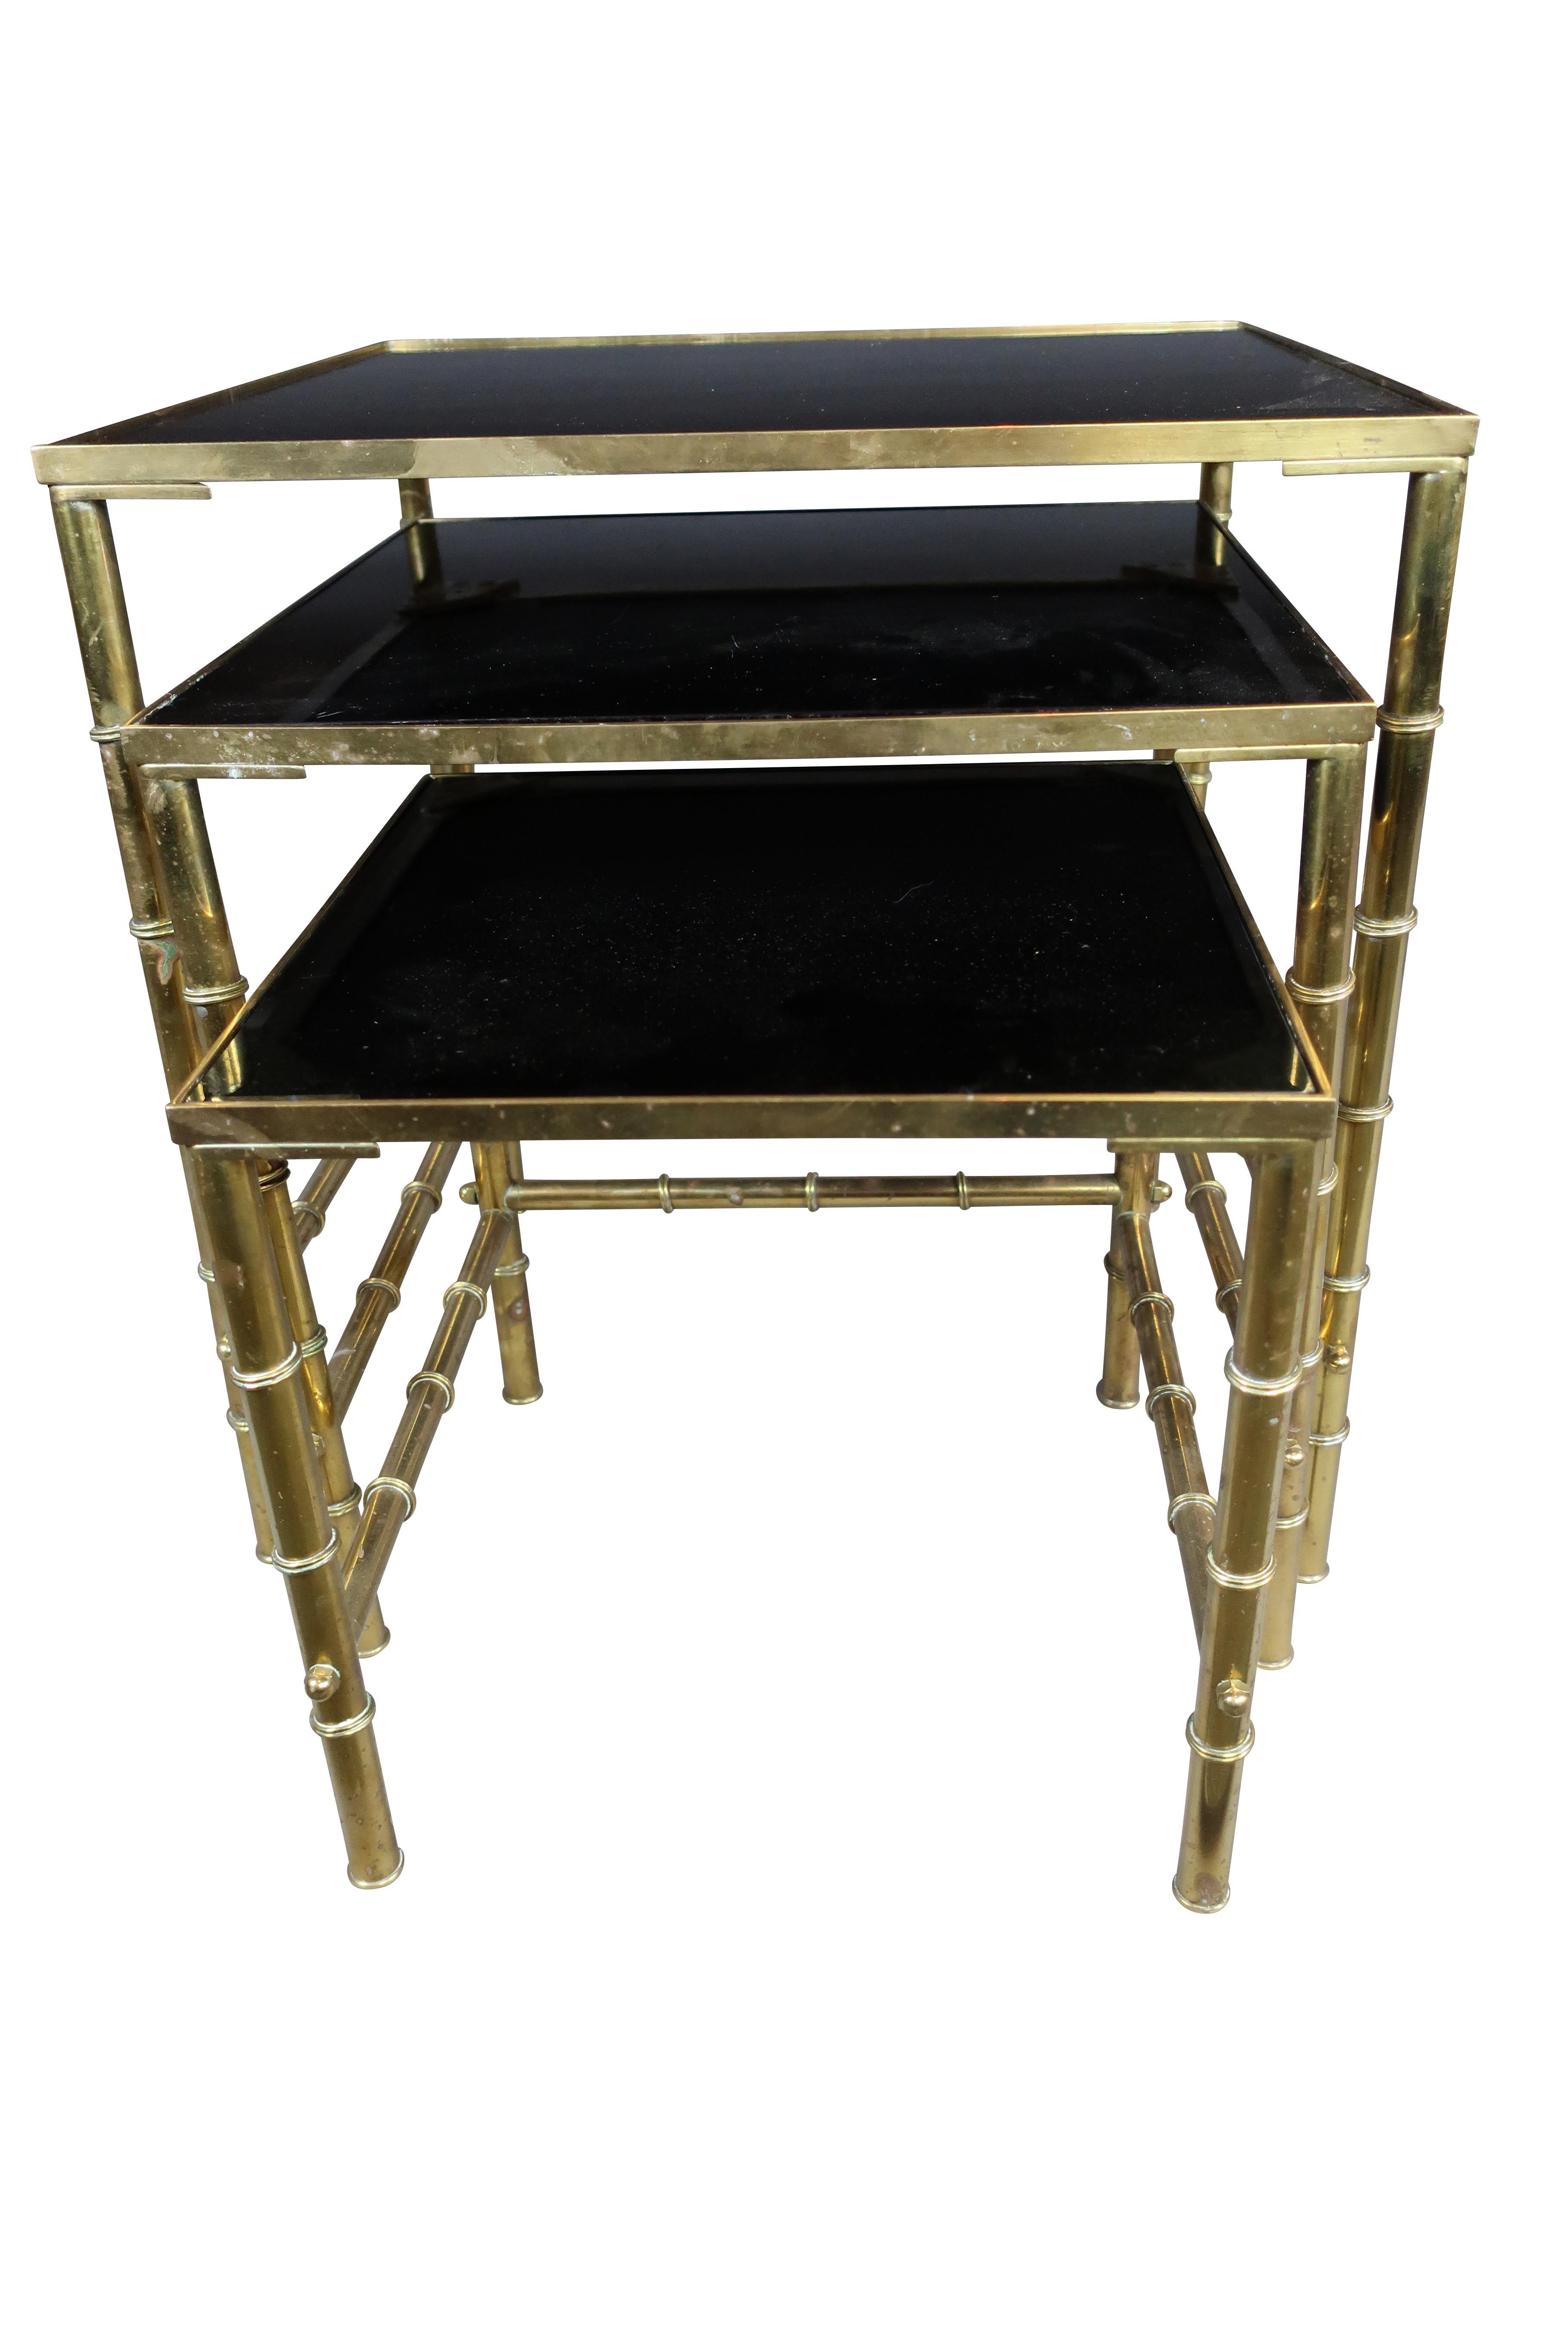 Set of three (3) Mid-Century Modern gold gilt metal faux bamboo nesting table with amethyst glass tops largest measures: 19-1/4